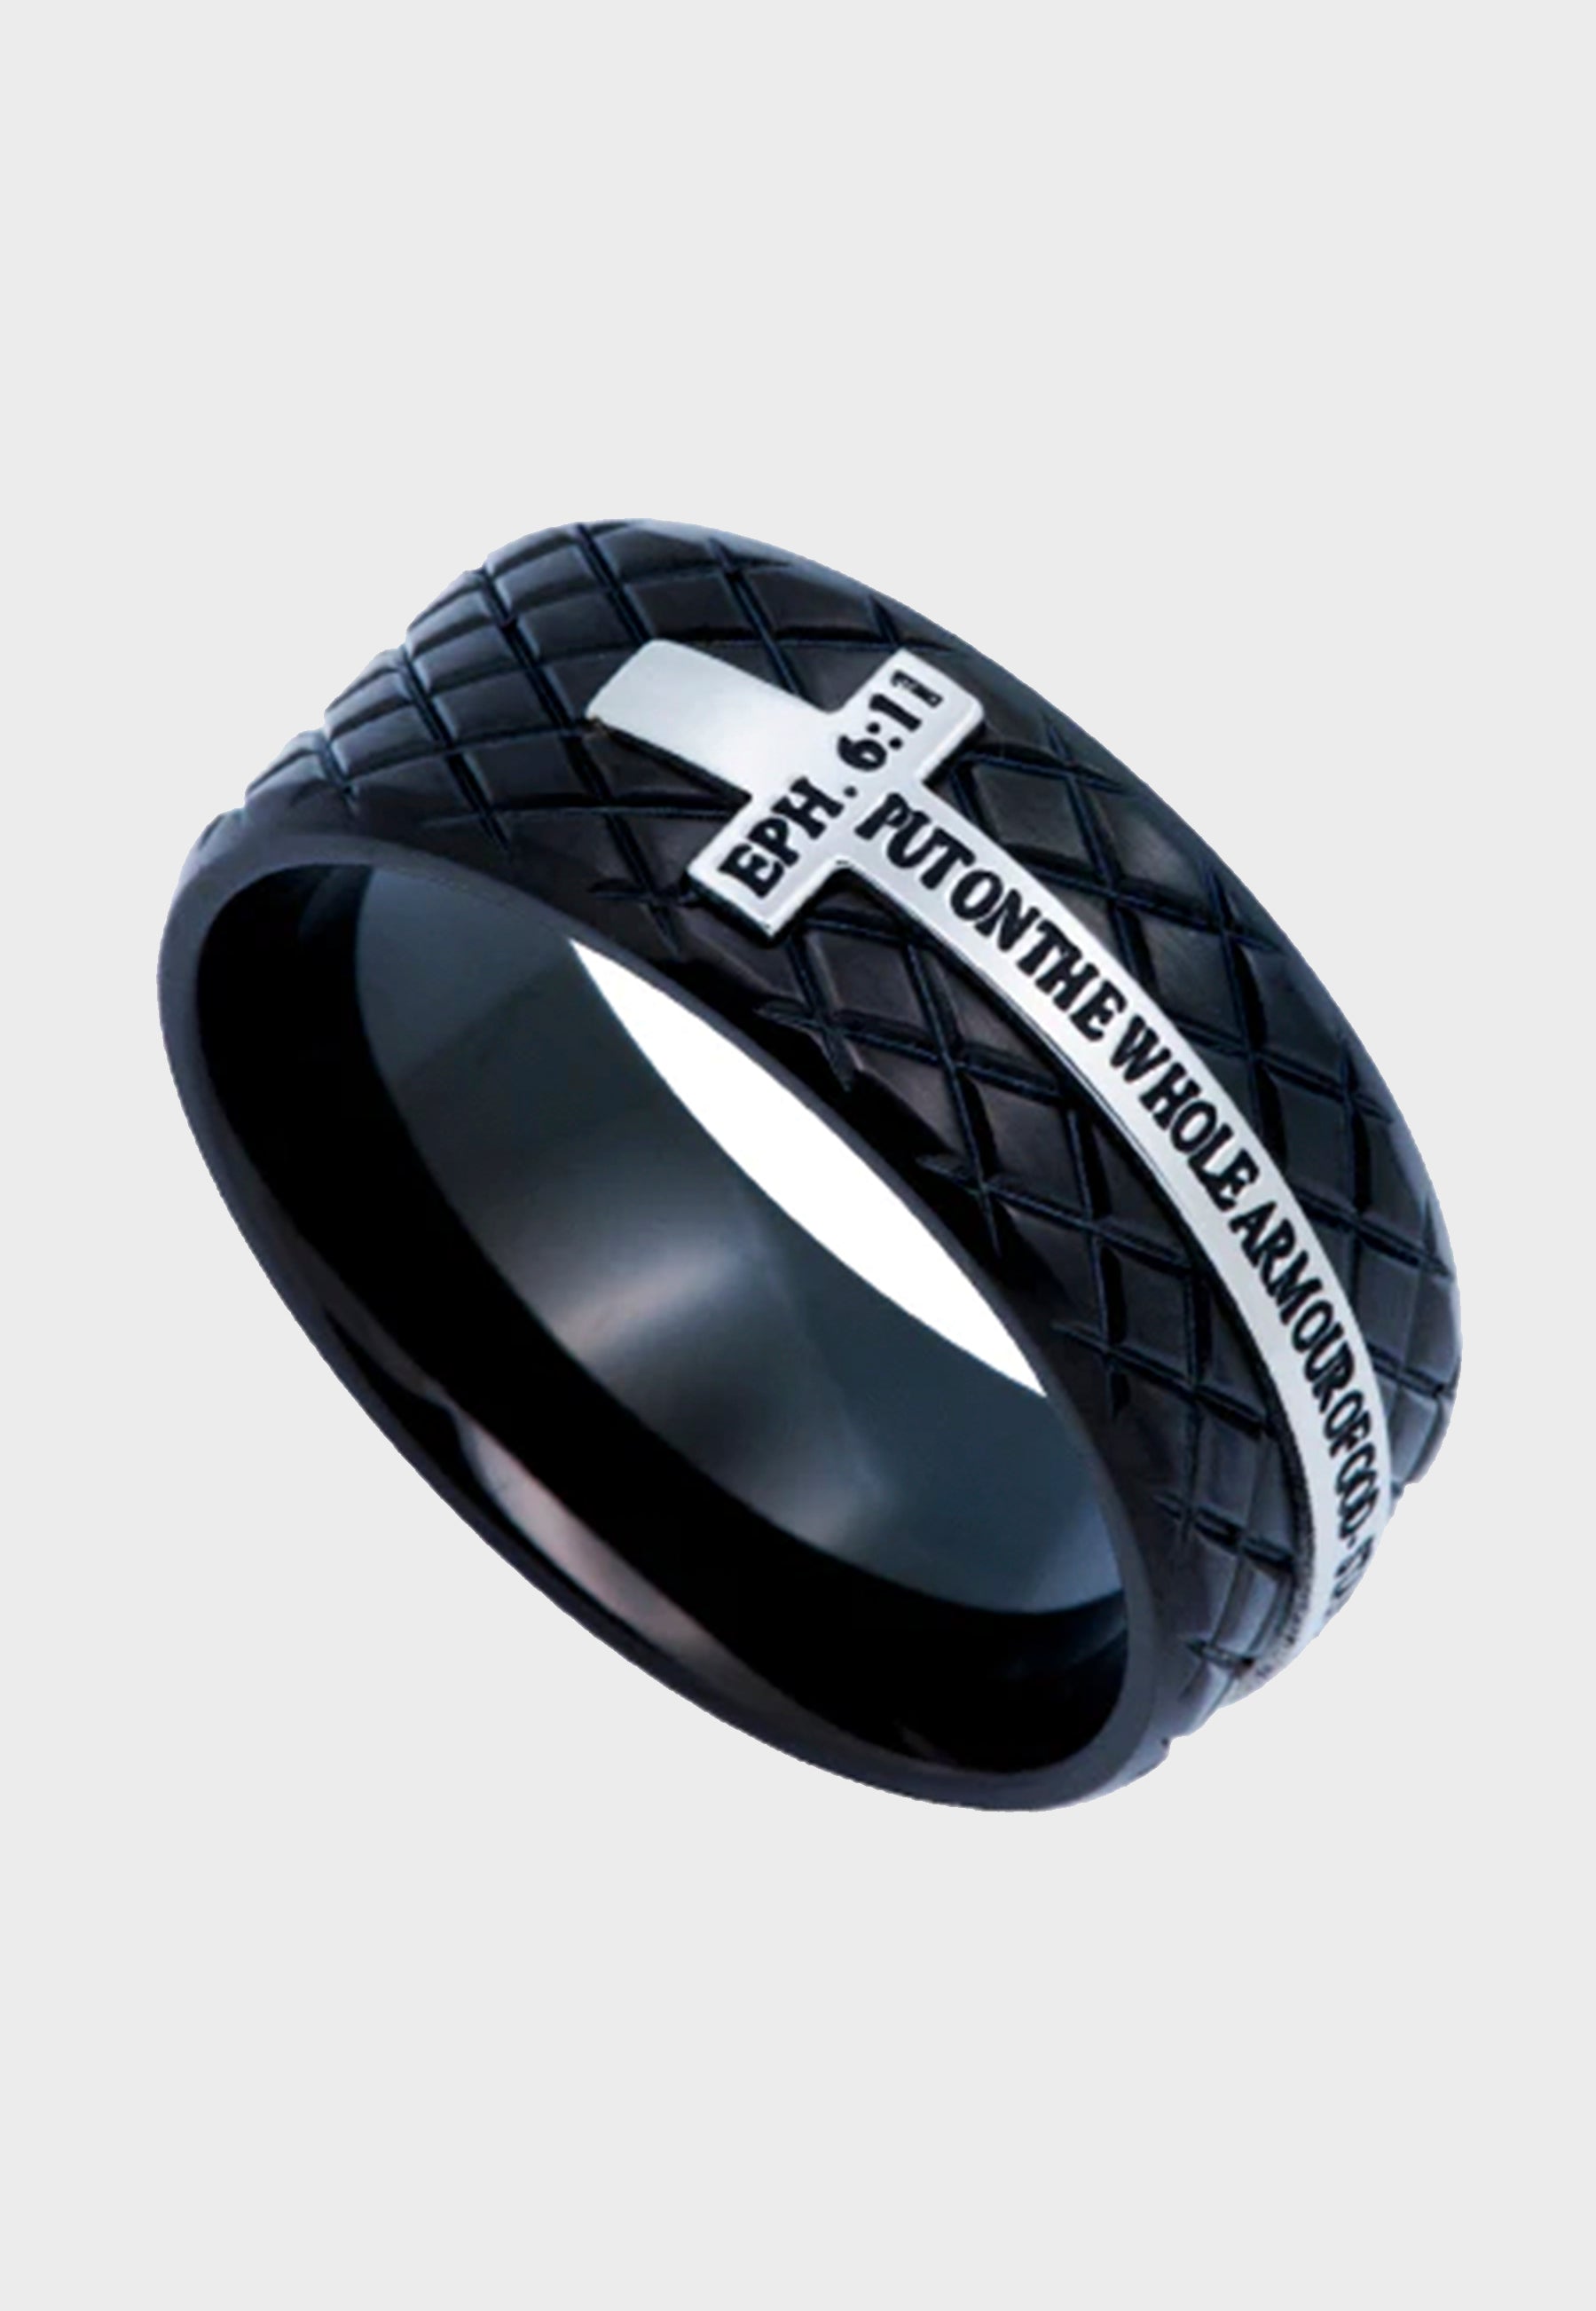 Ephesians 6:11 inscribed on mens ring